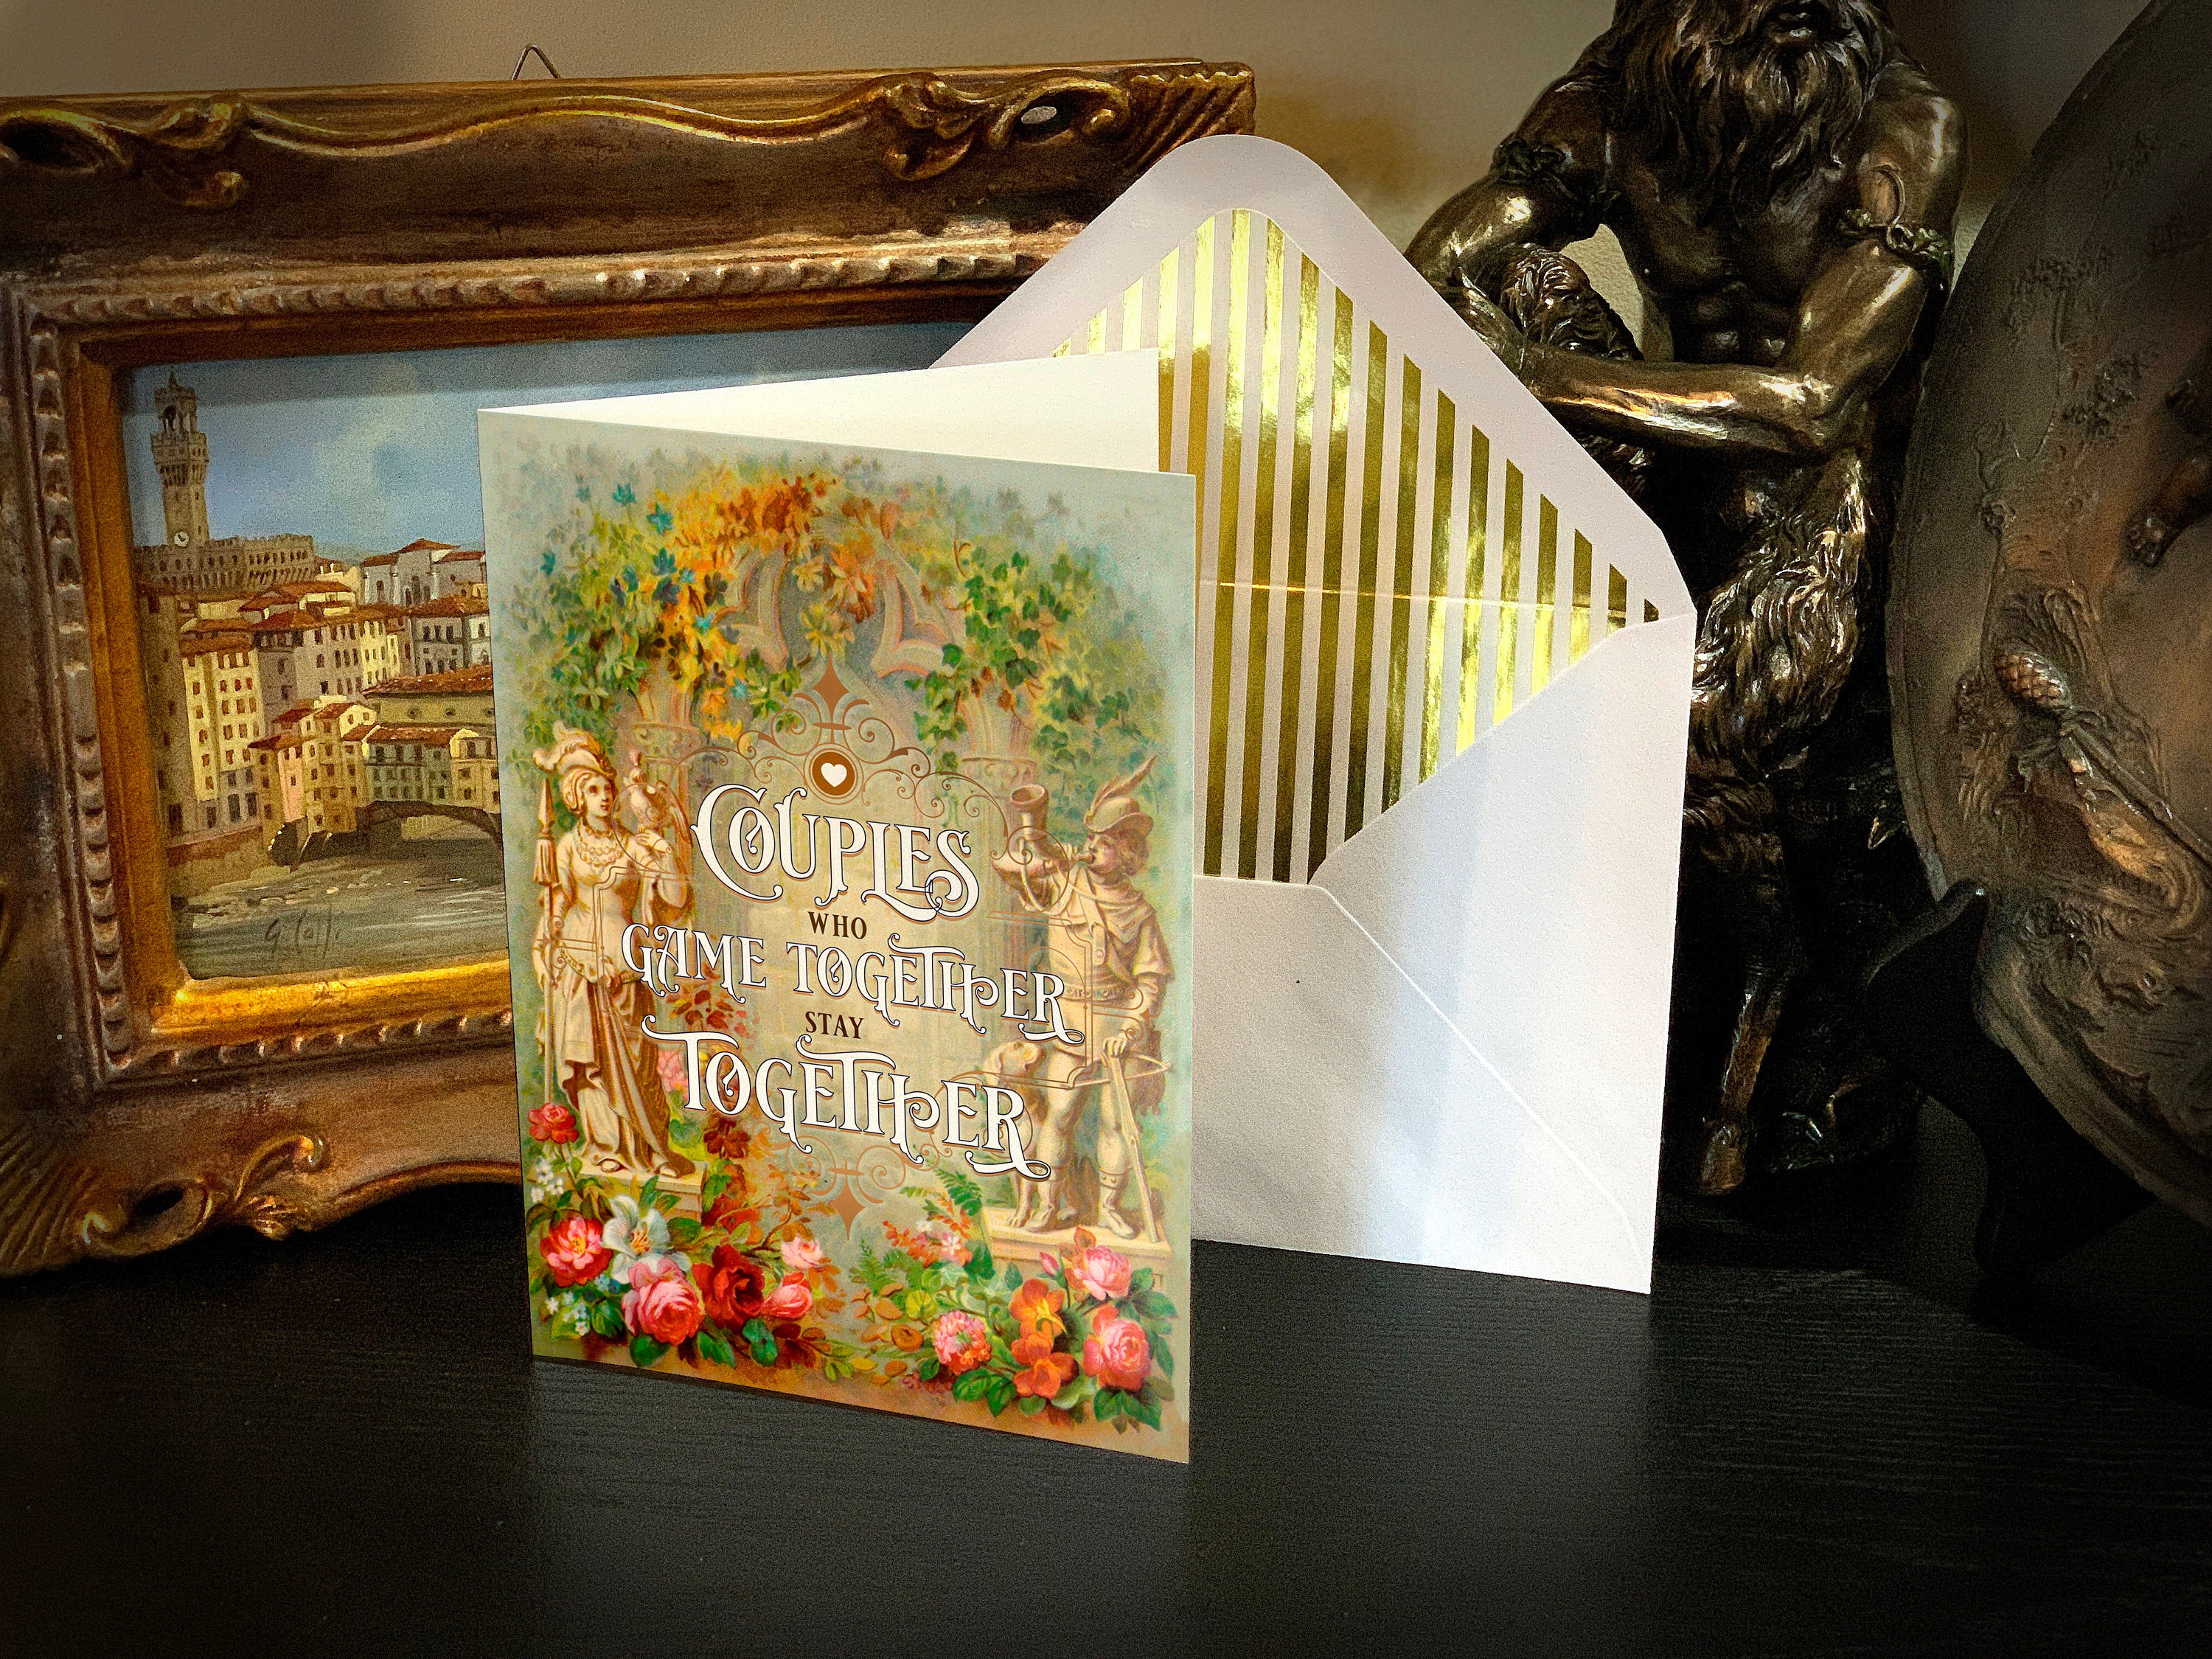 Let's Play!, Victorian Valentine's Day Greeting Card for Gamers with Elegant Gold Foil Envelope